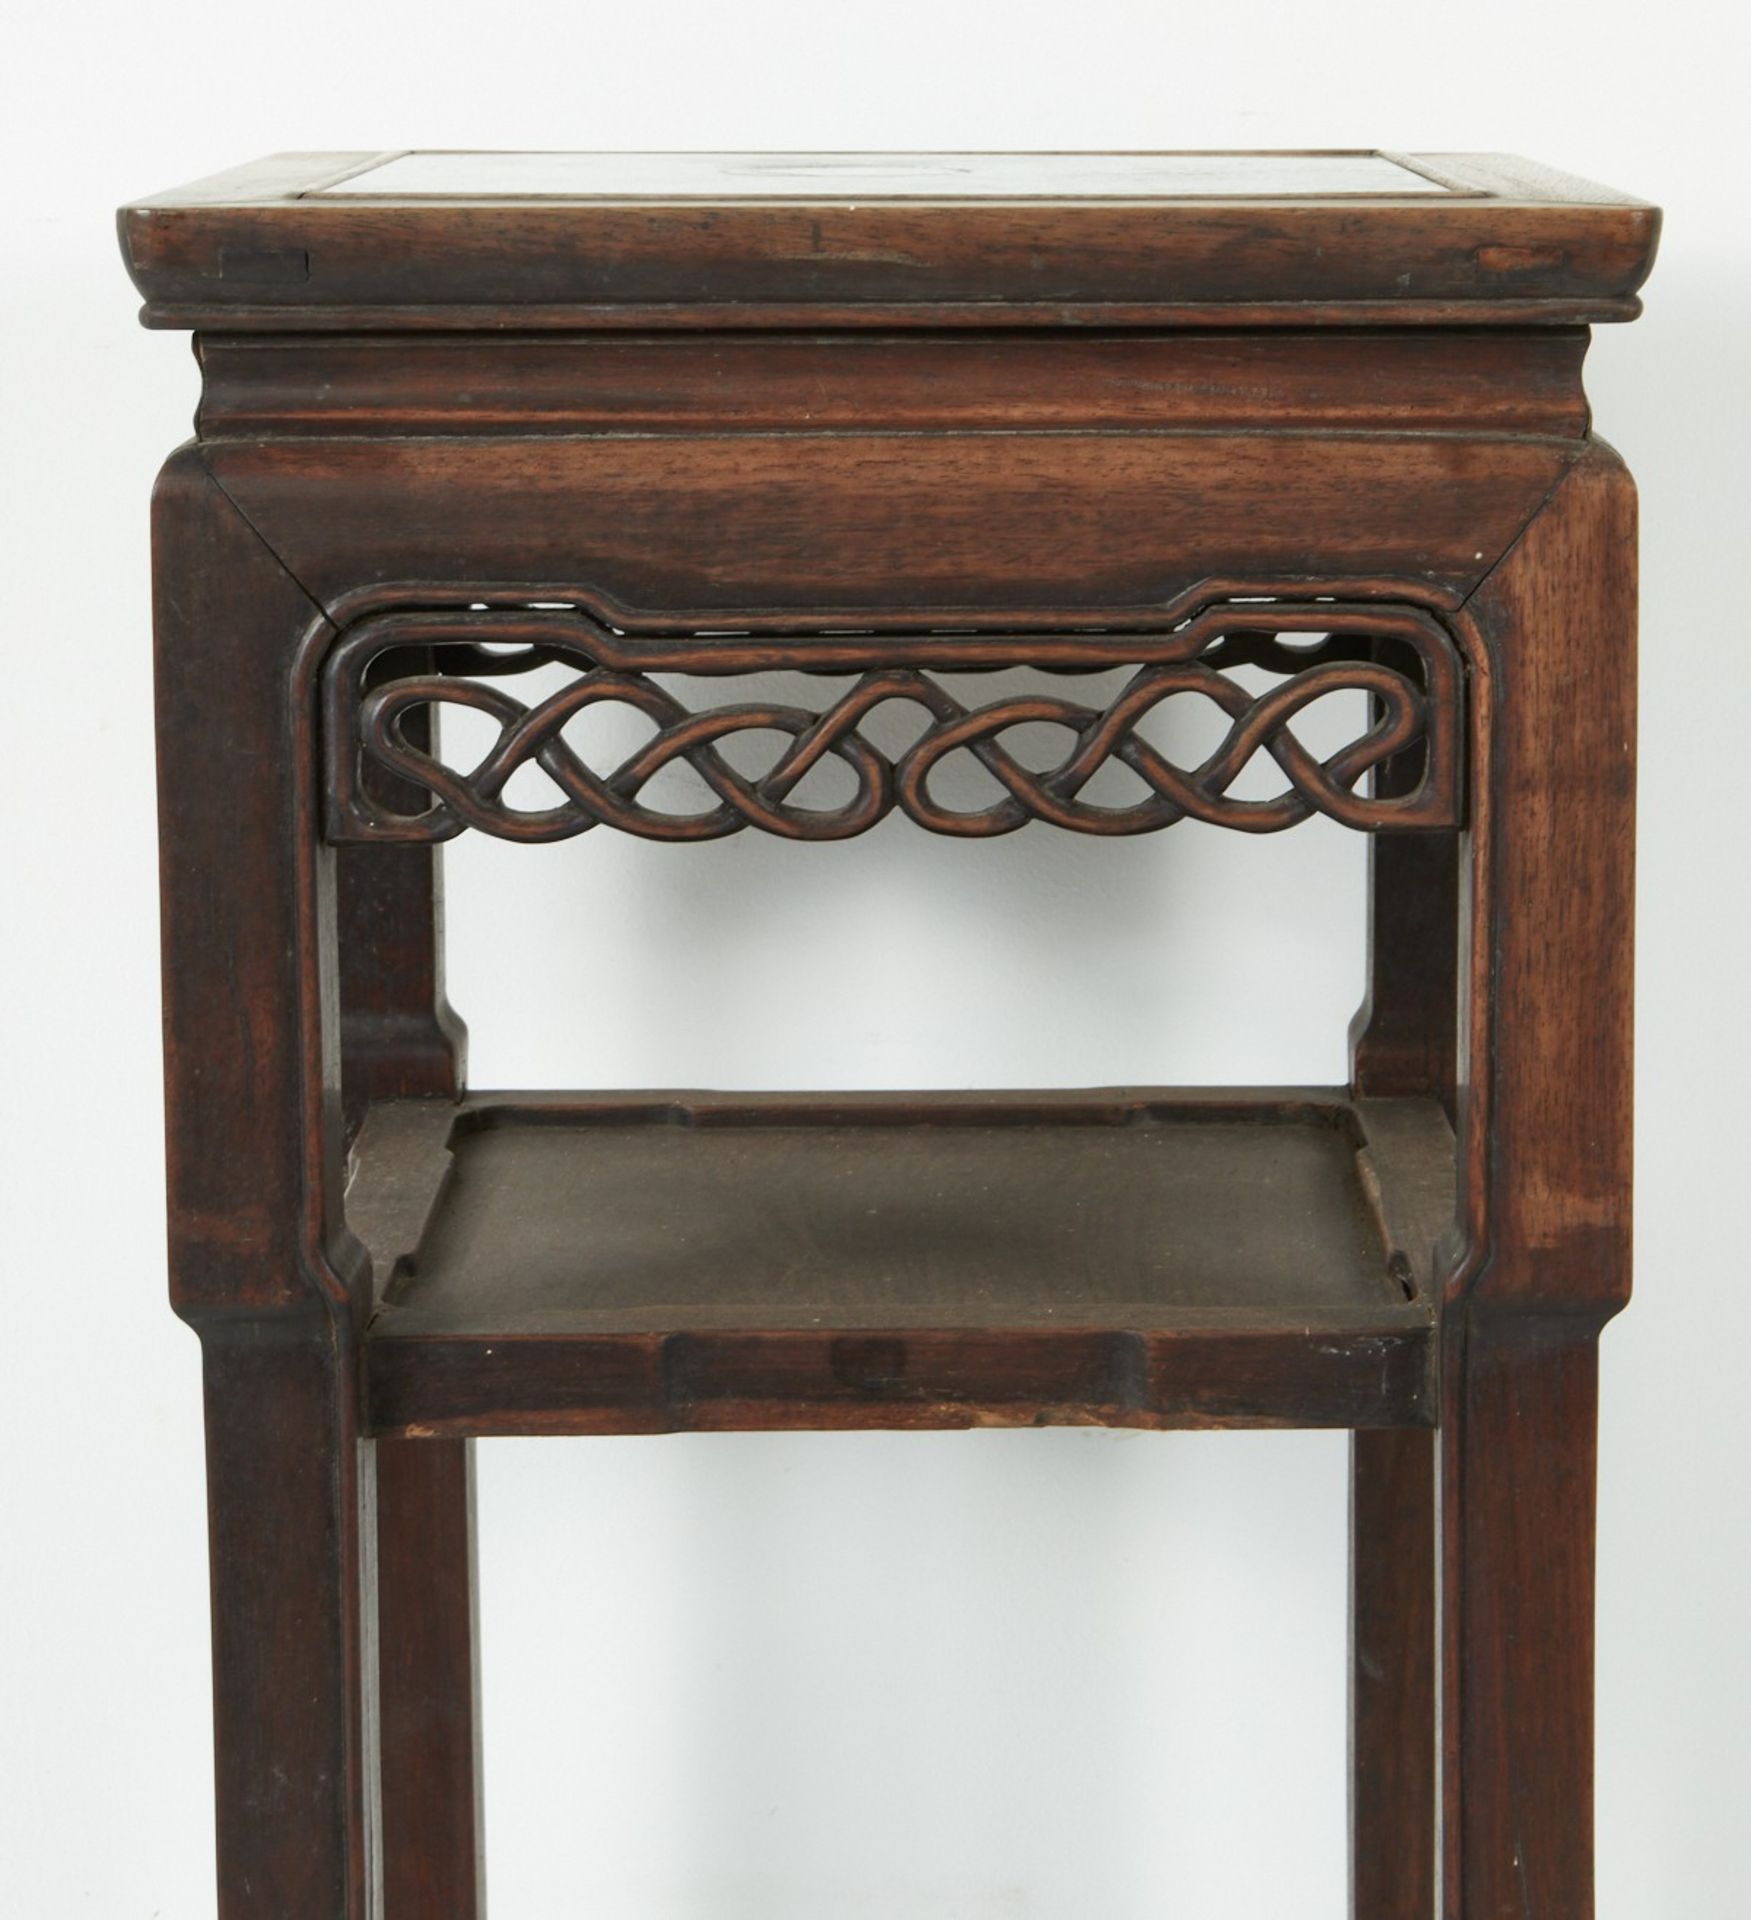 19th c. Chinese Rosewood Stand w/ Carved Skirt - Image 2 of 8